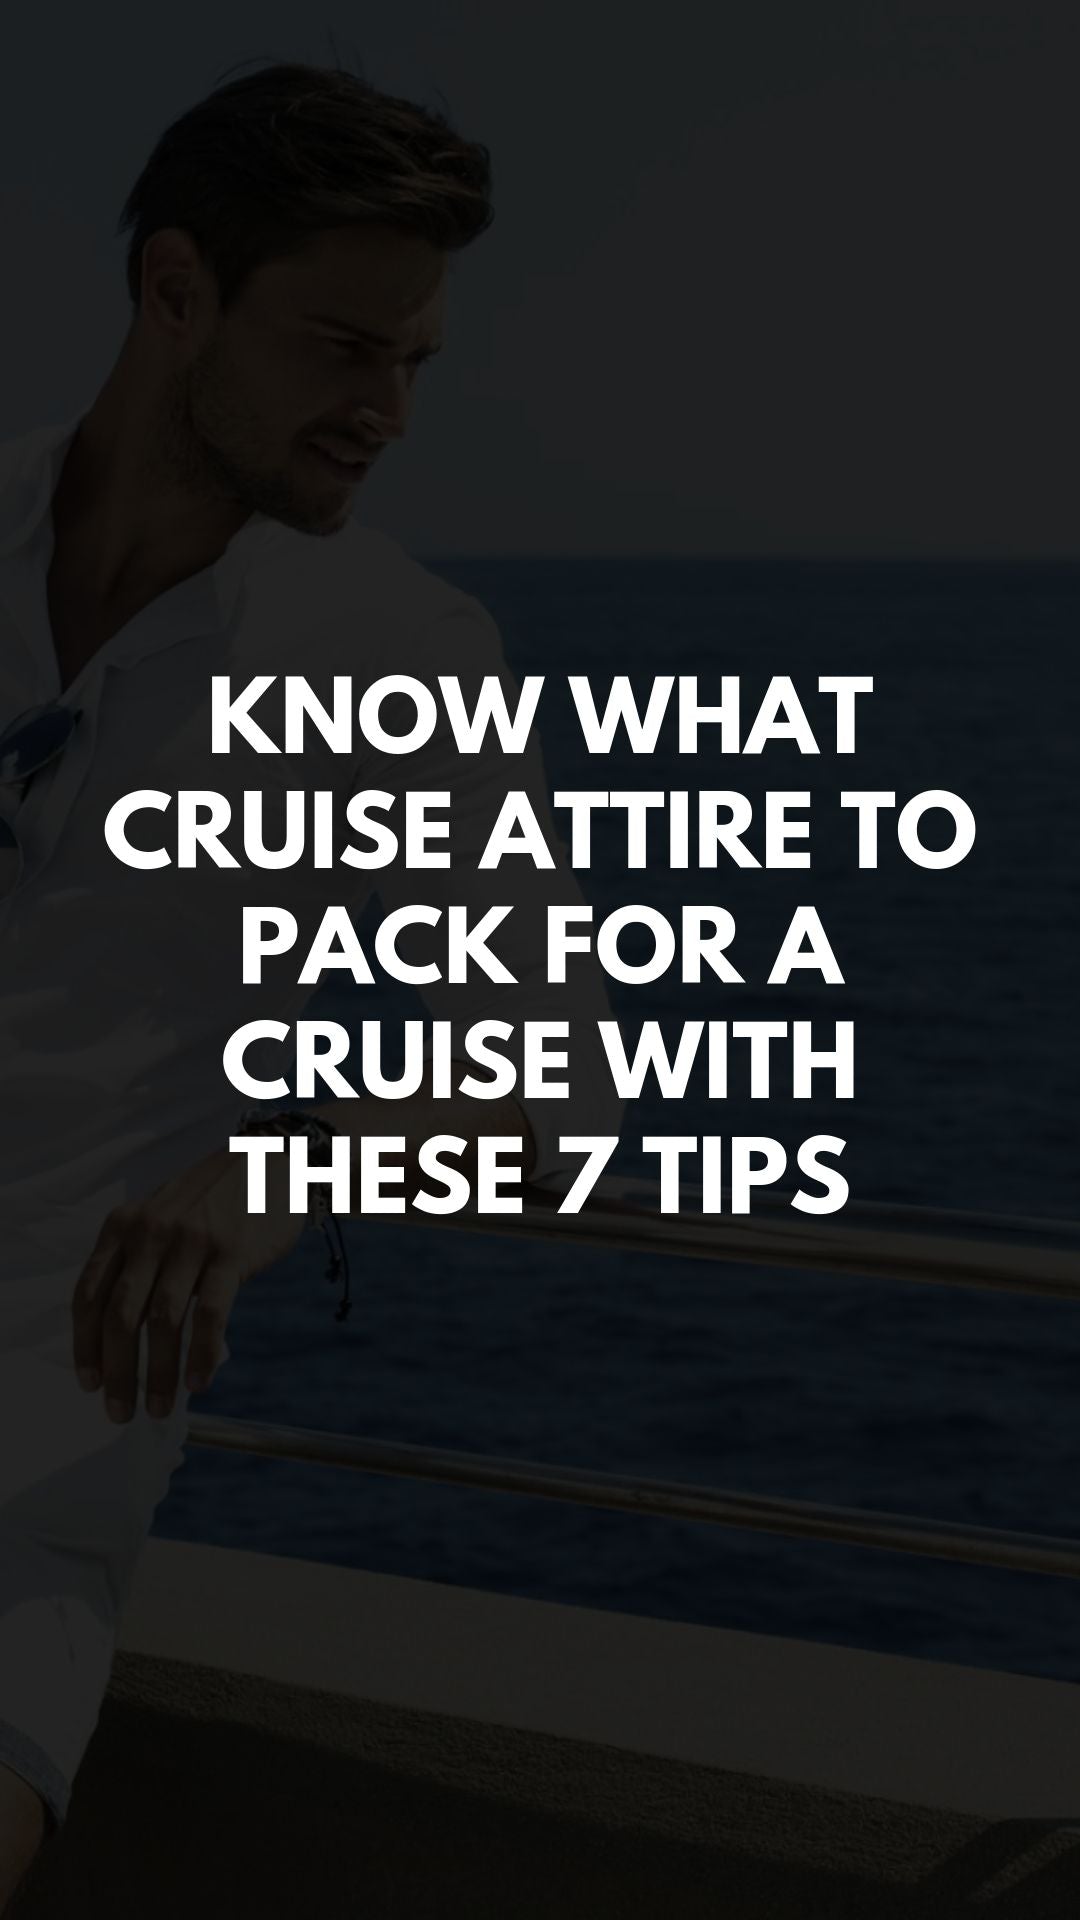 Know What Cruise Attire to Pack For a Cruise With These 7 Tips